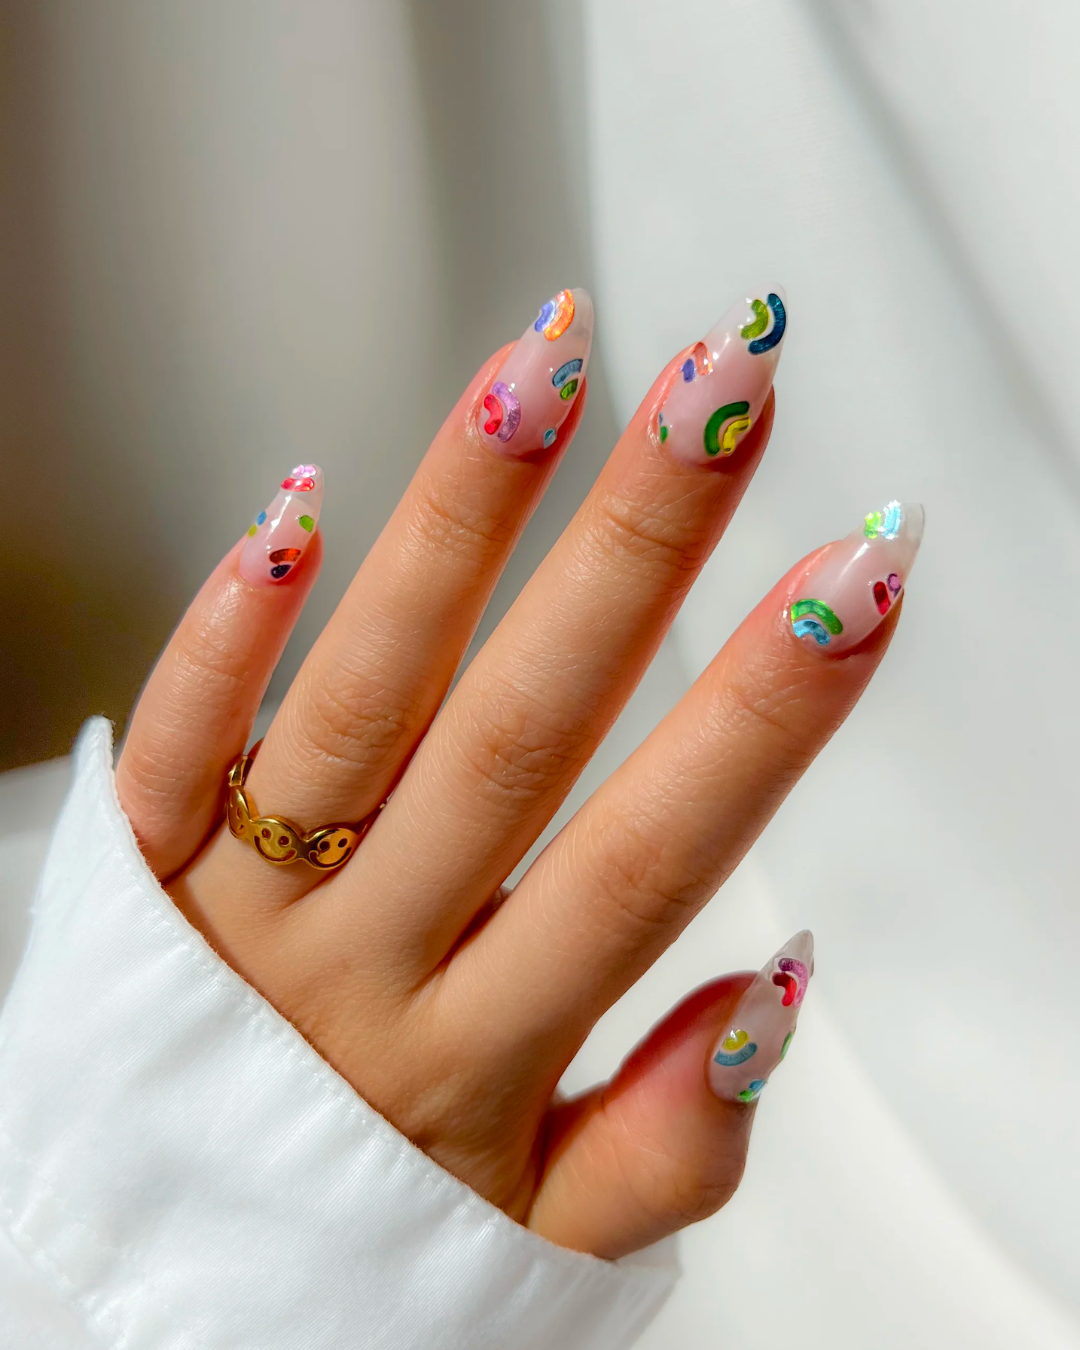 2024 Nail Trends According to Experts